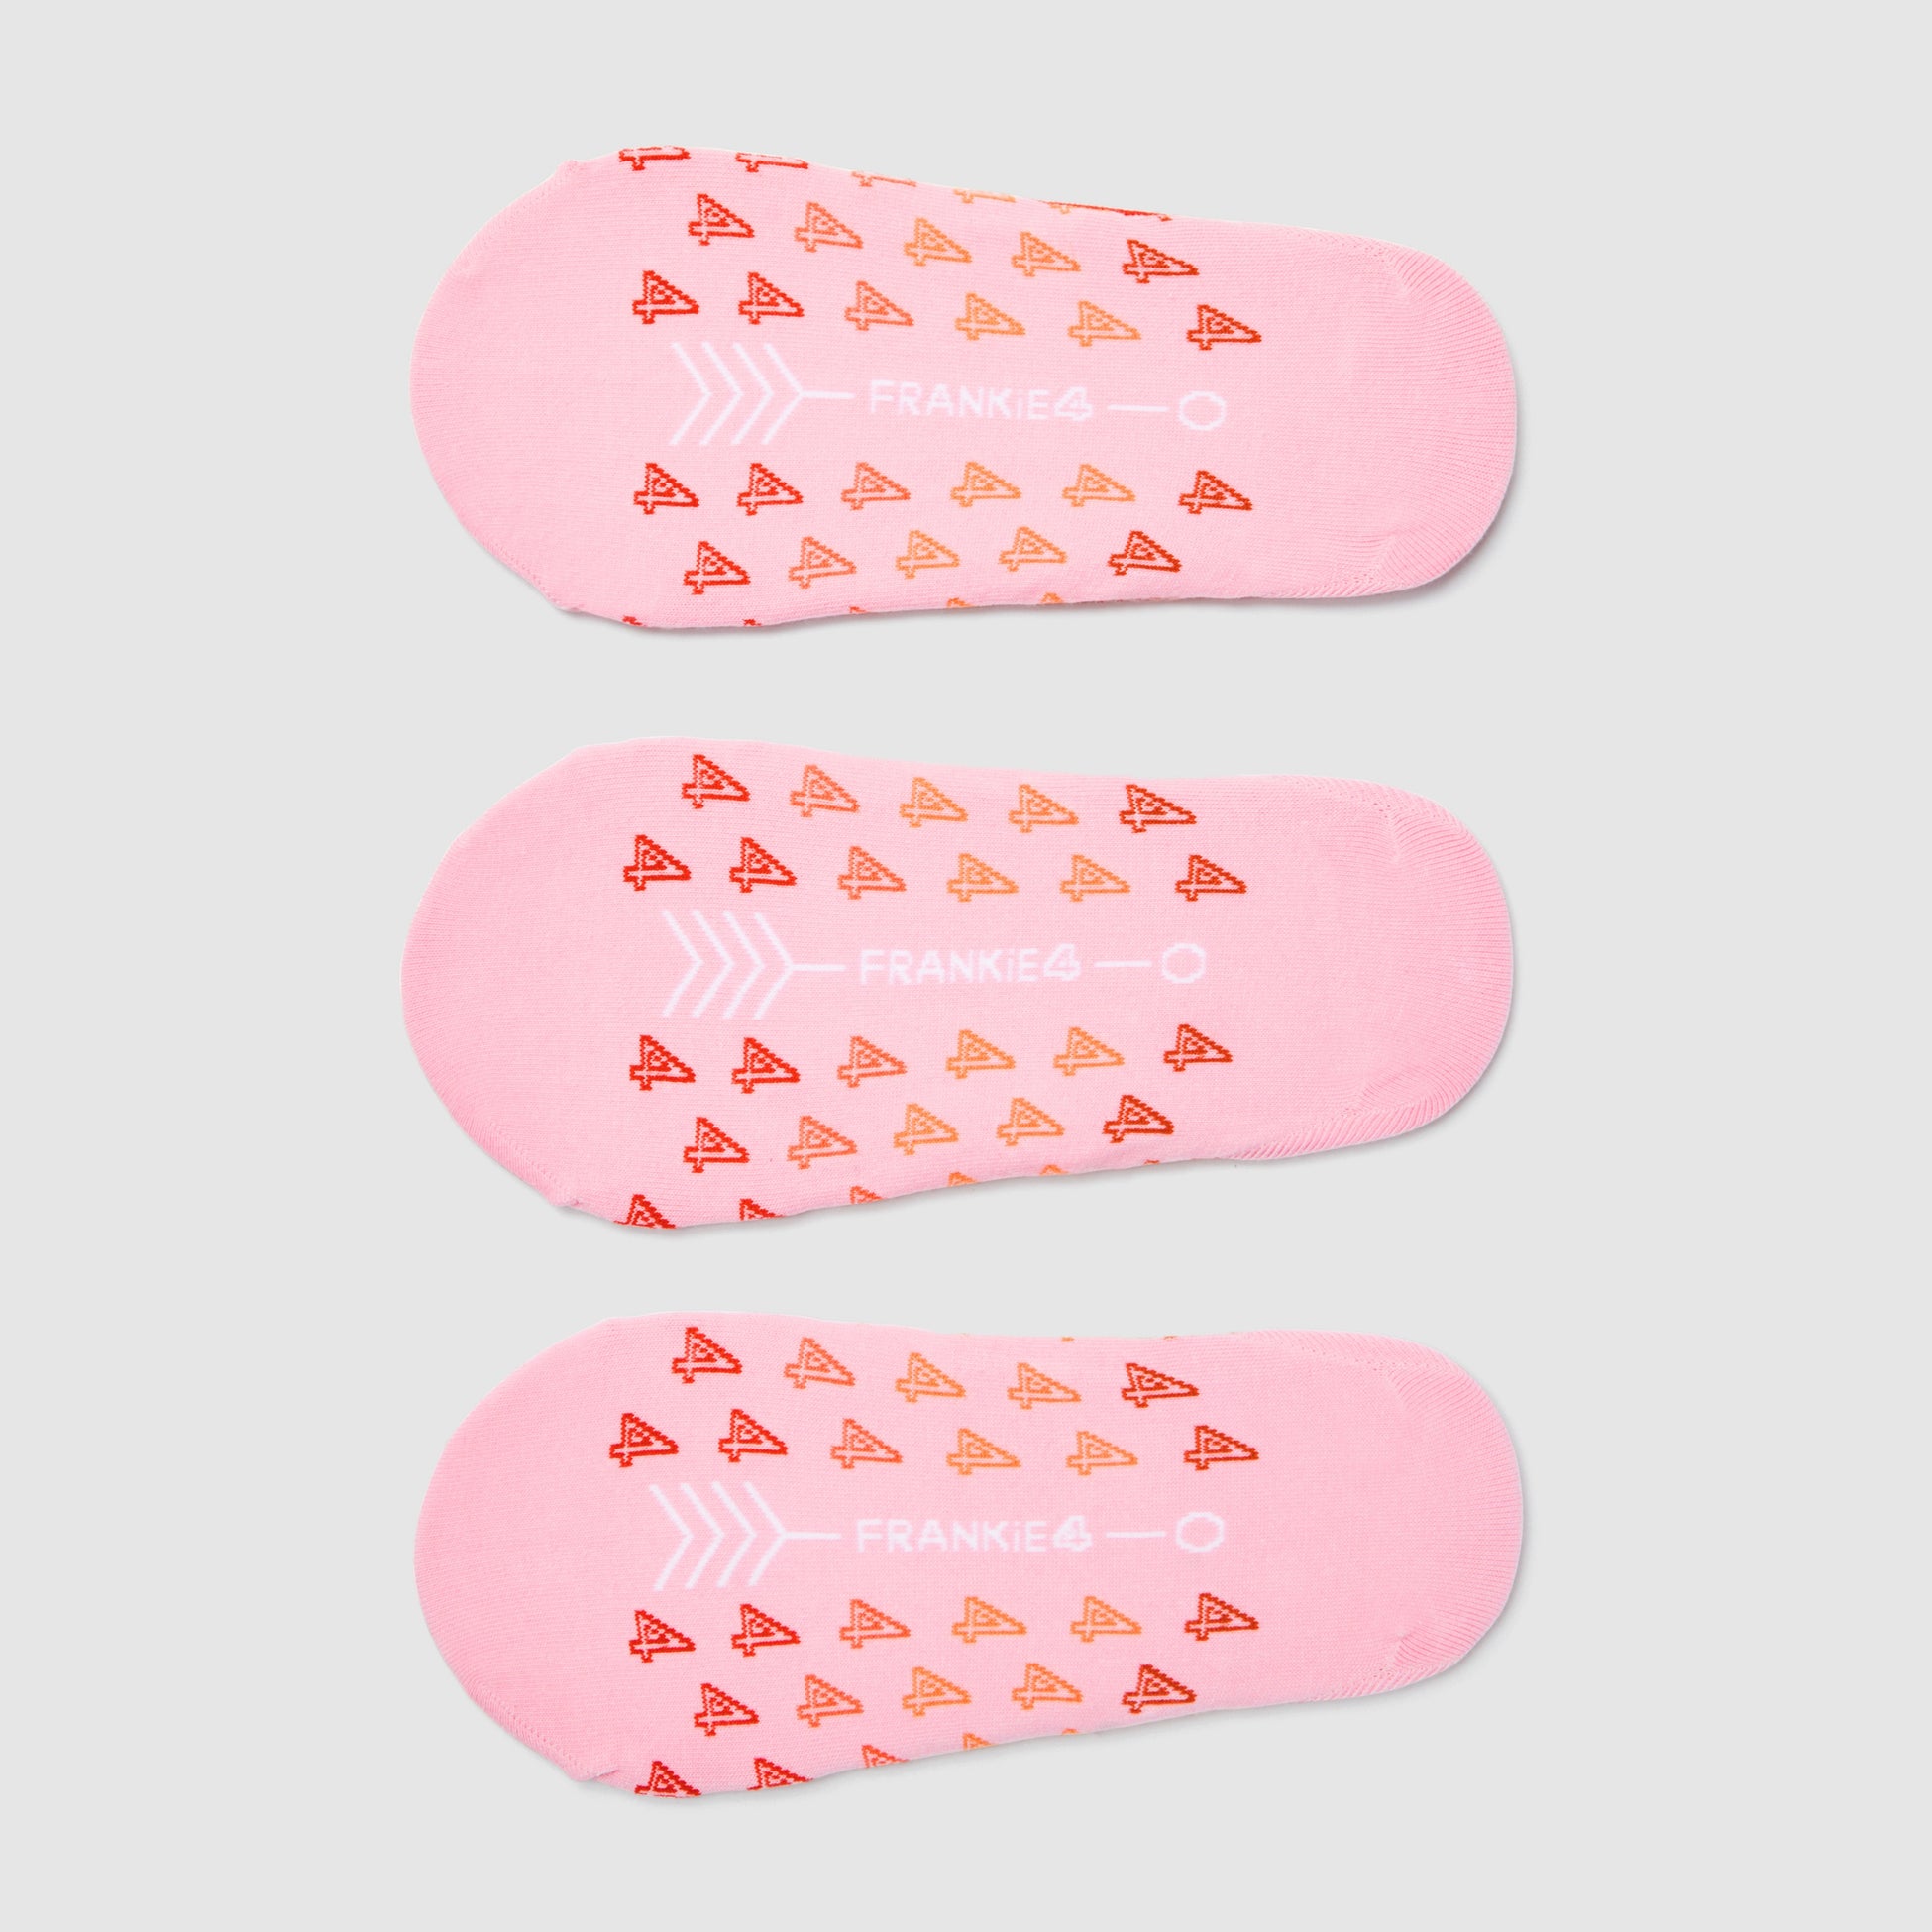 No-Show Adult Hot Pink/Red 3 Pack Socks | FRANKIE4